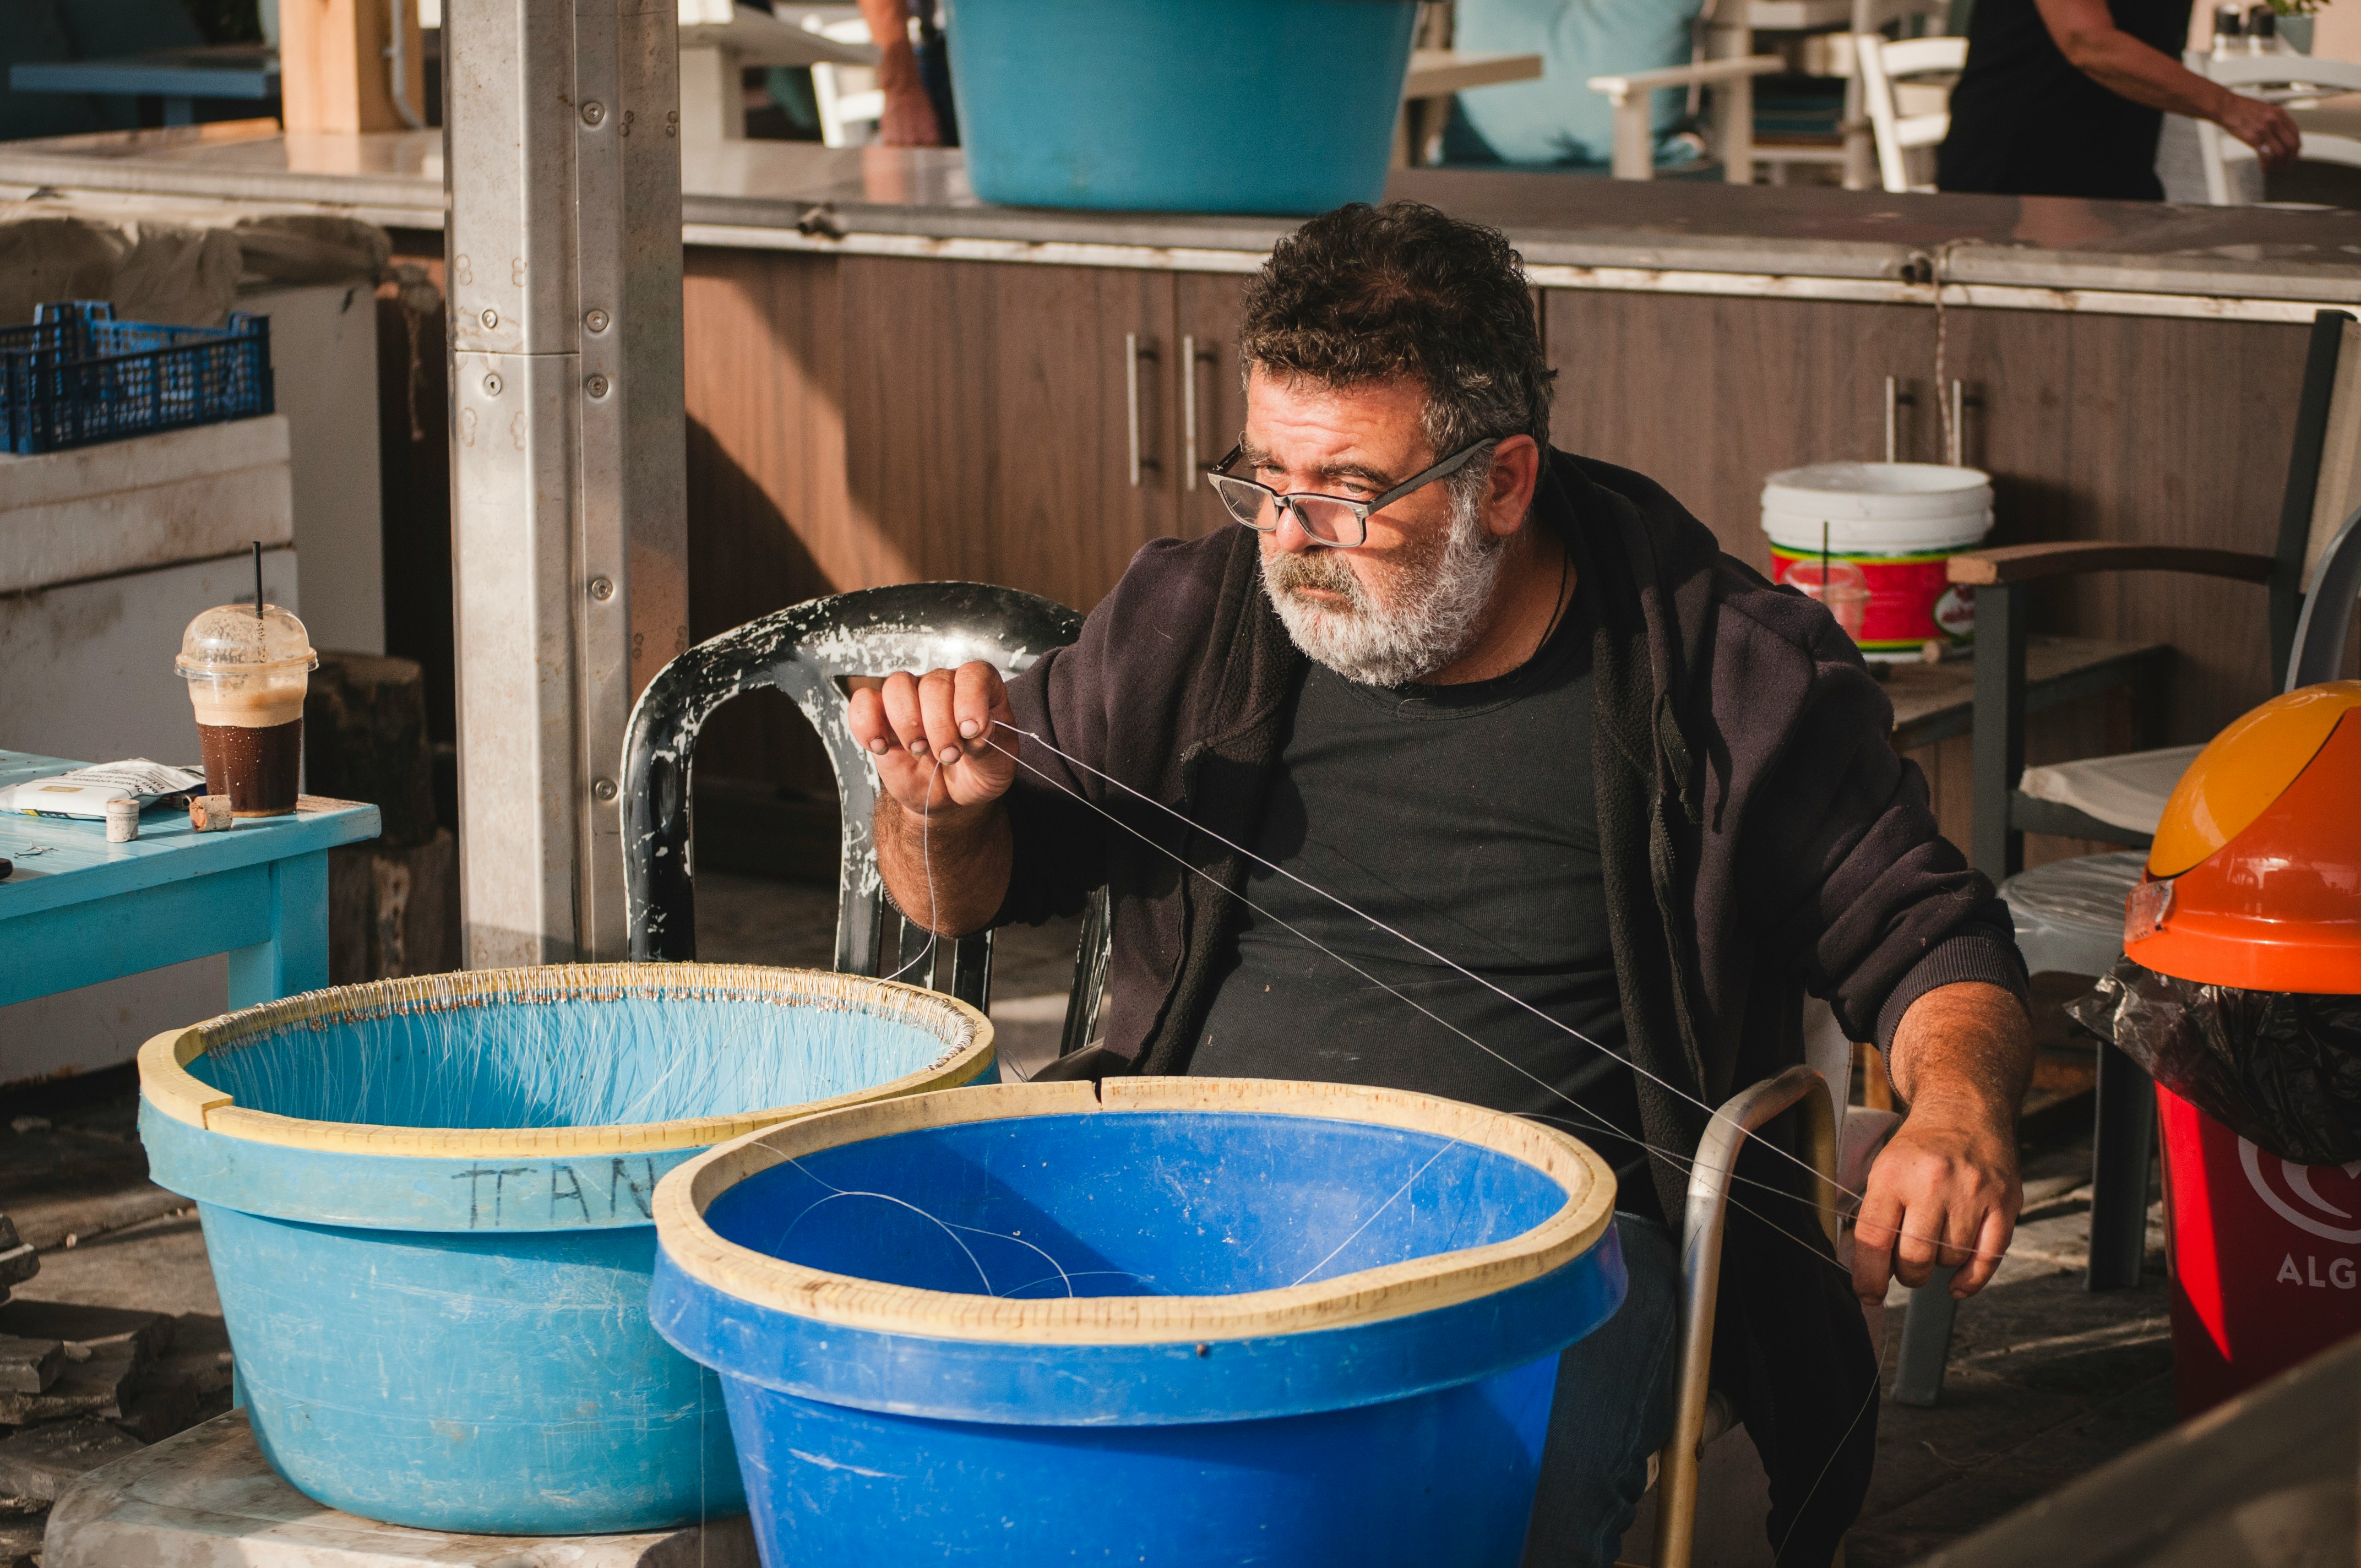 man sitting on chair near two blue pots